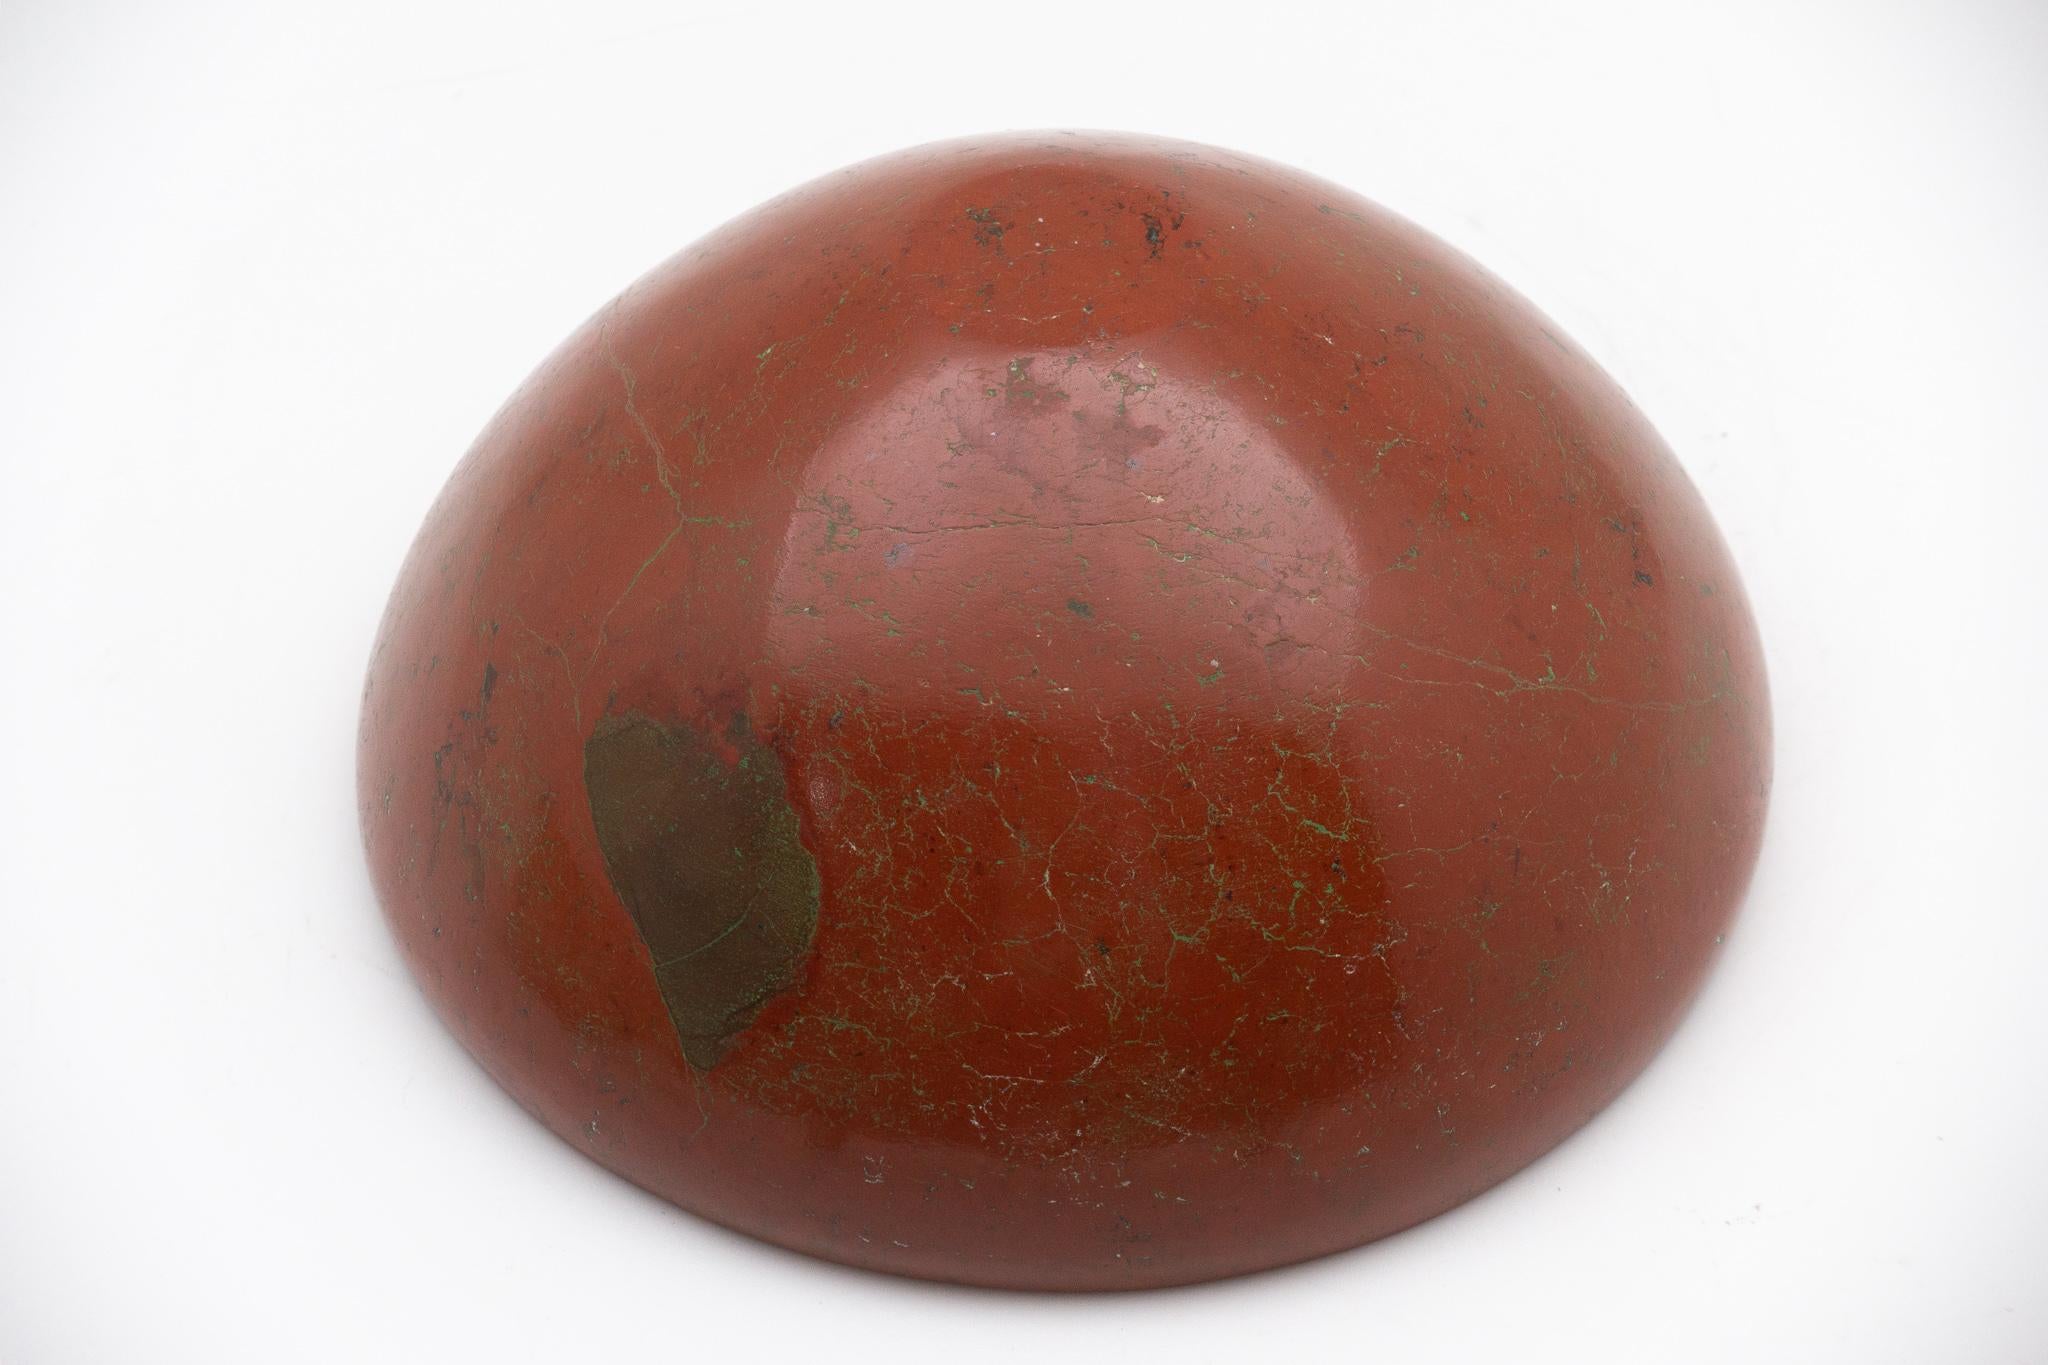 Hand-carved and polished out of a solid piece of red jasper stone. This 6